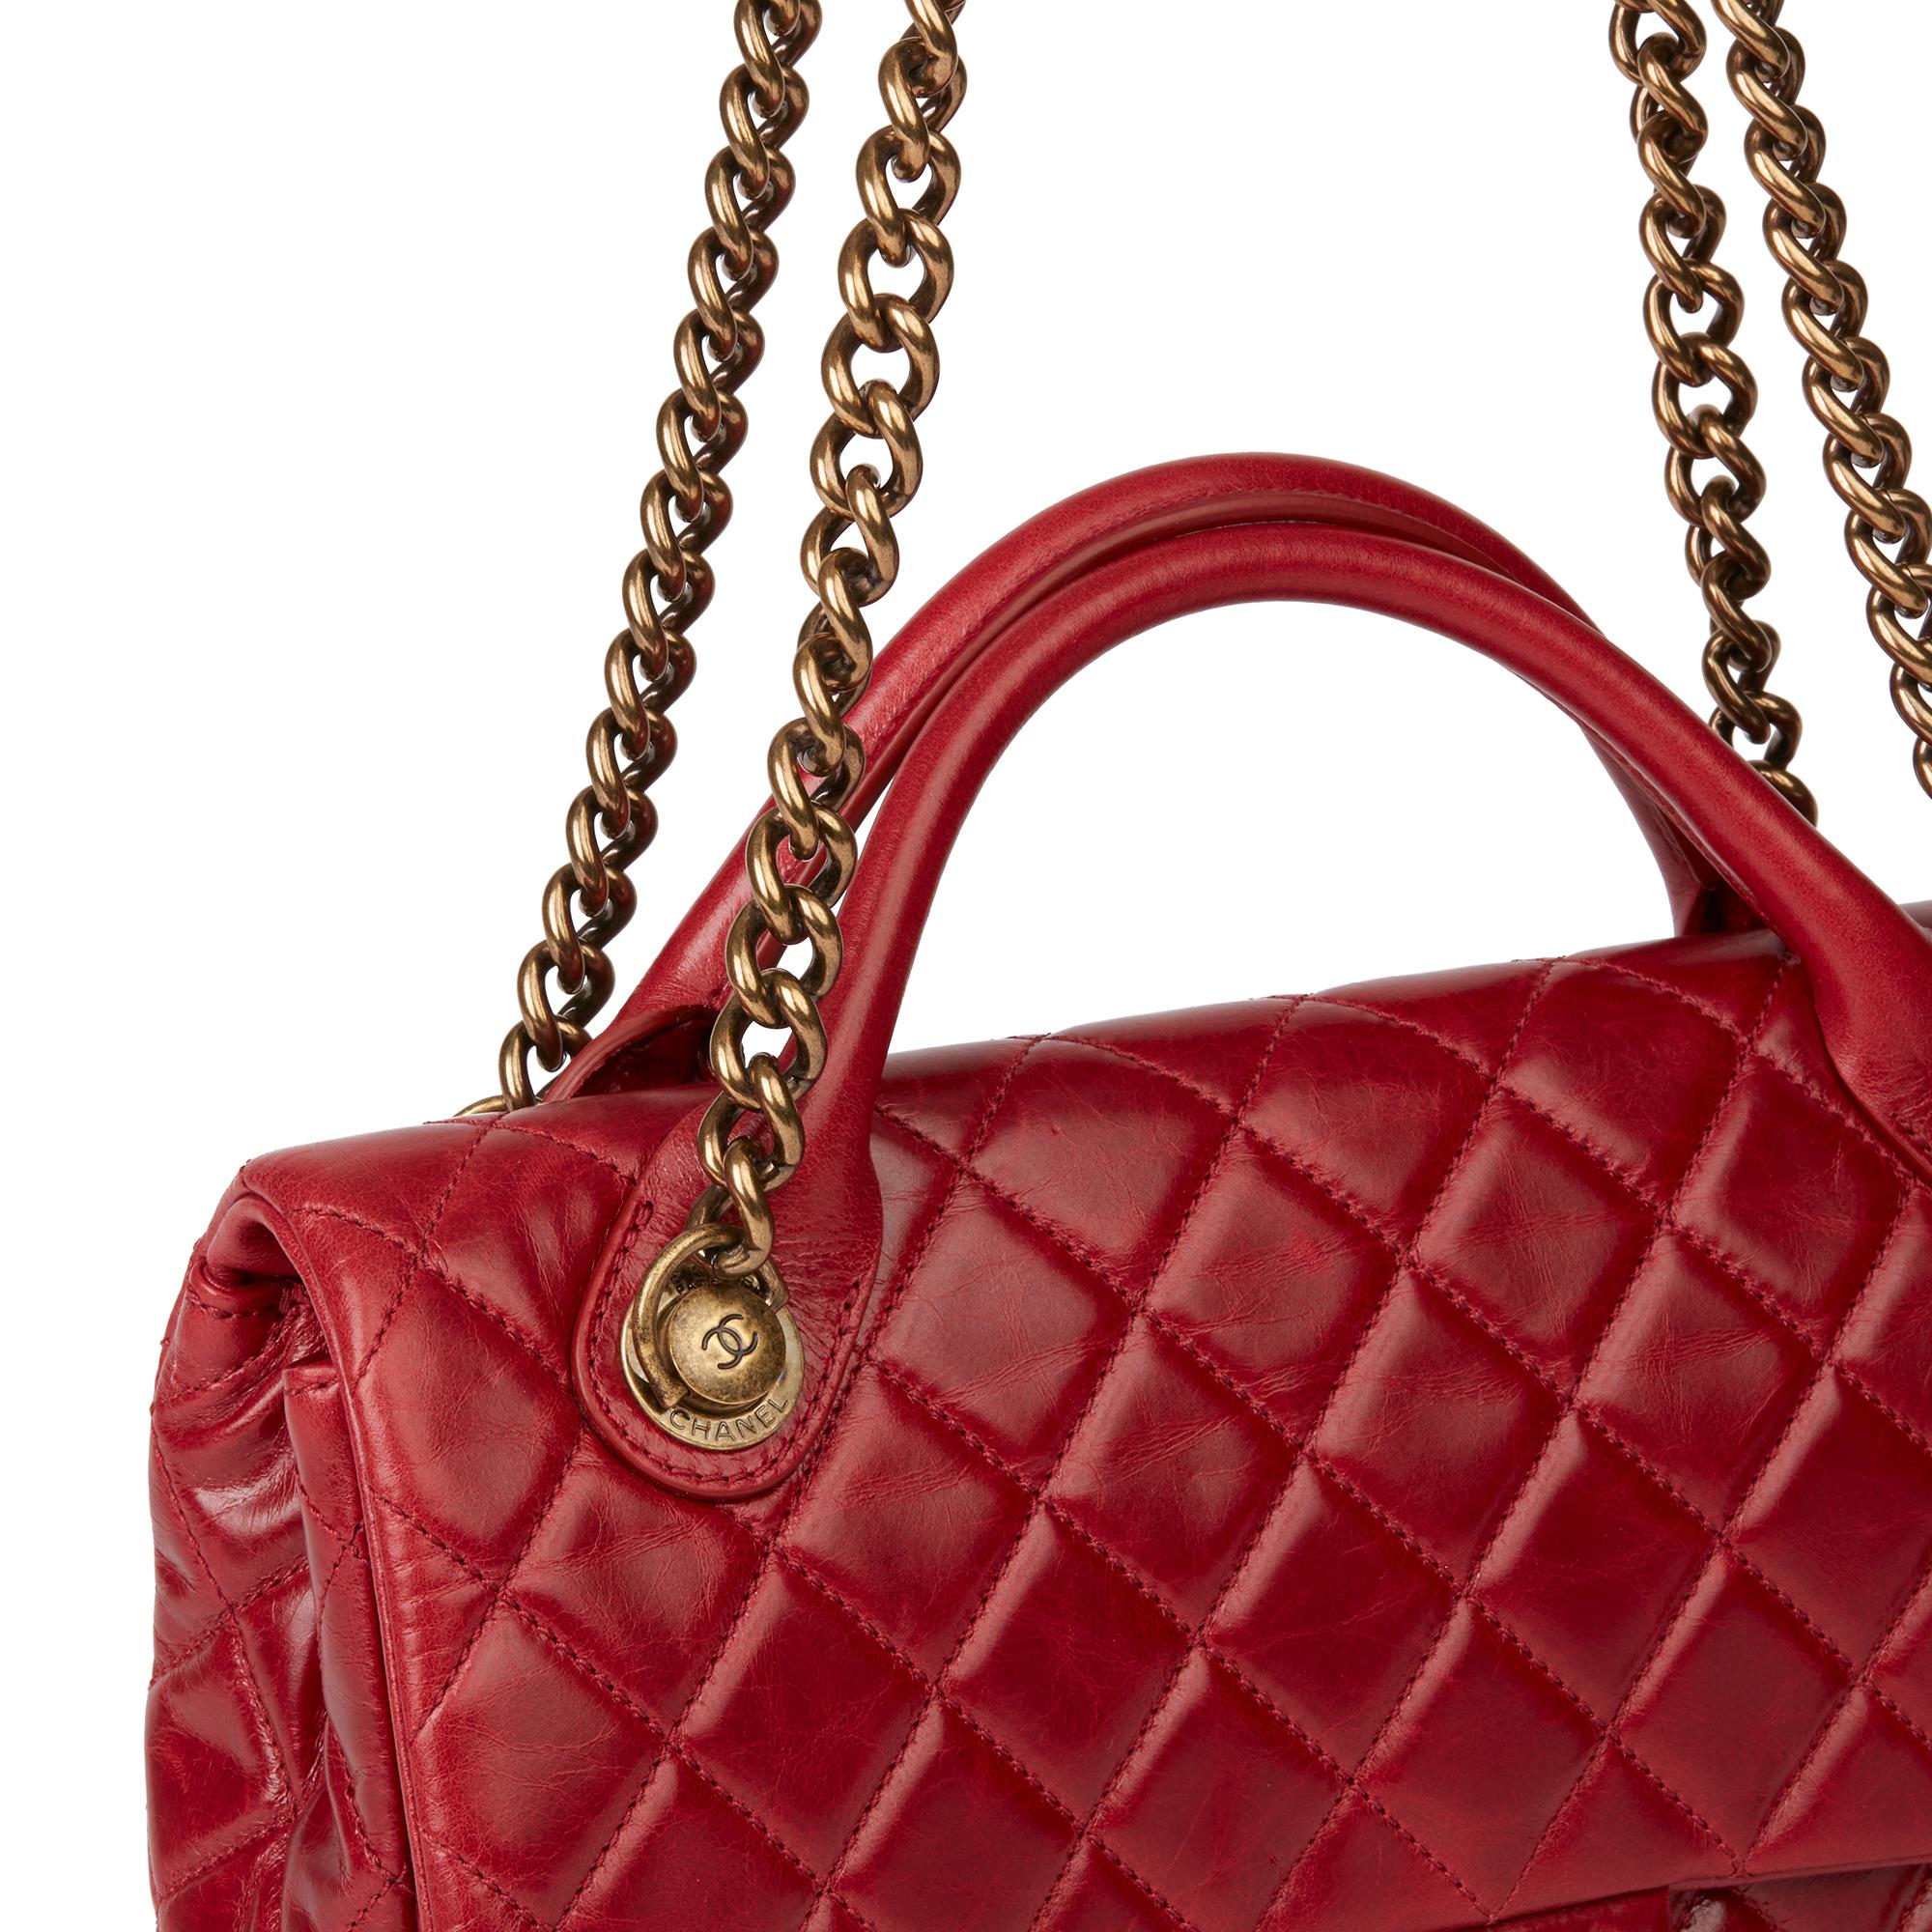 Women's 2014 Chanel Red Quilted Glazed Calfskin Leather Medium Castle Rock Flap Bag